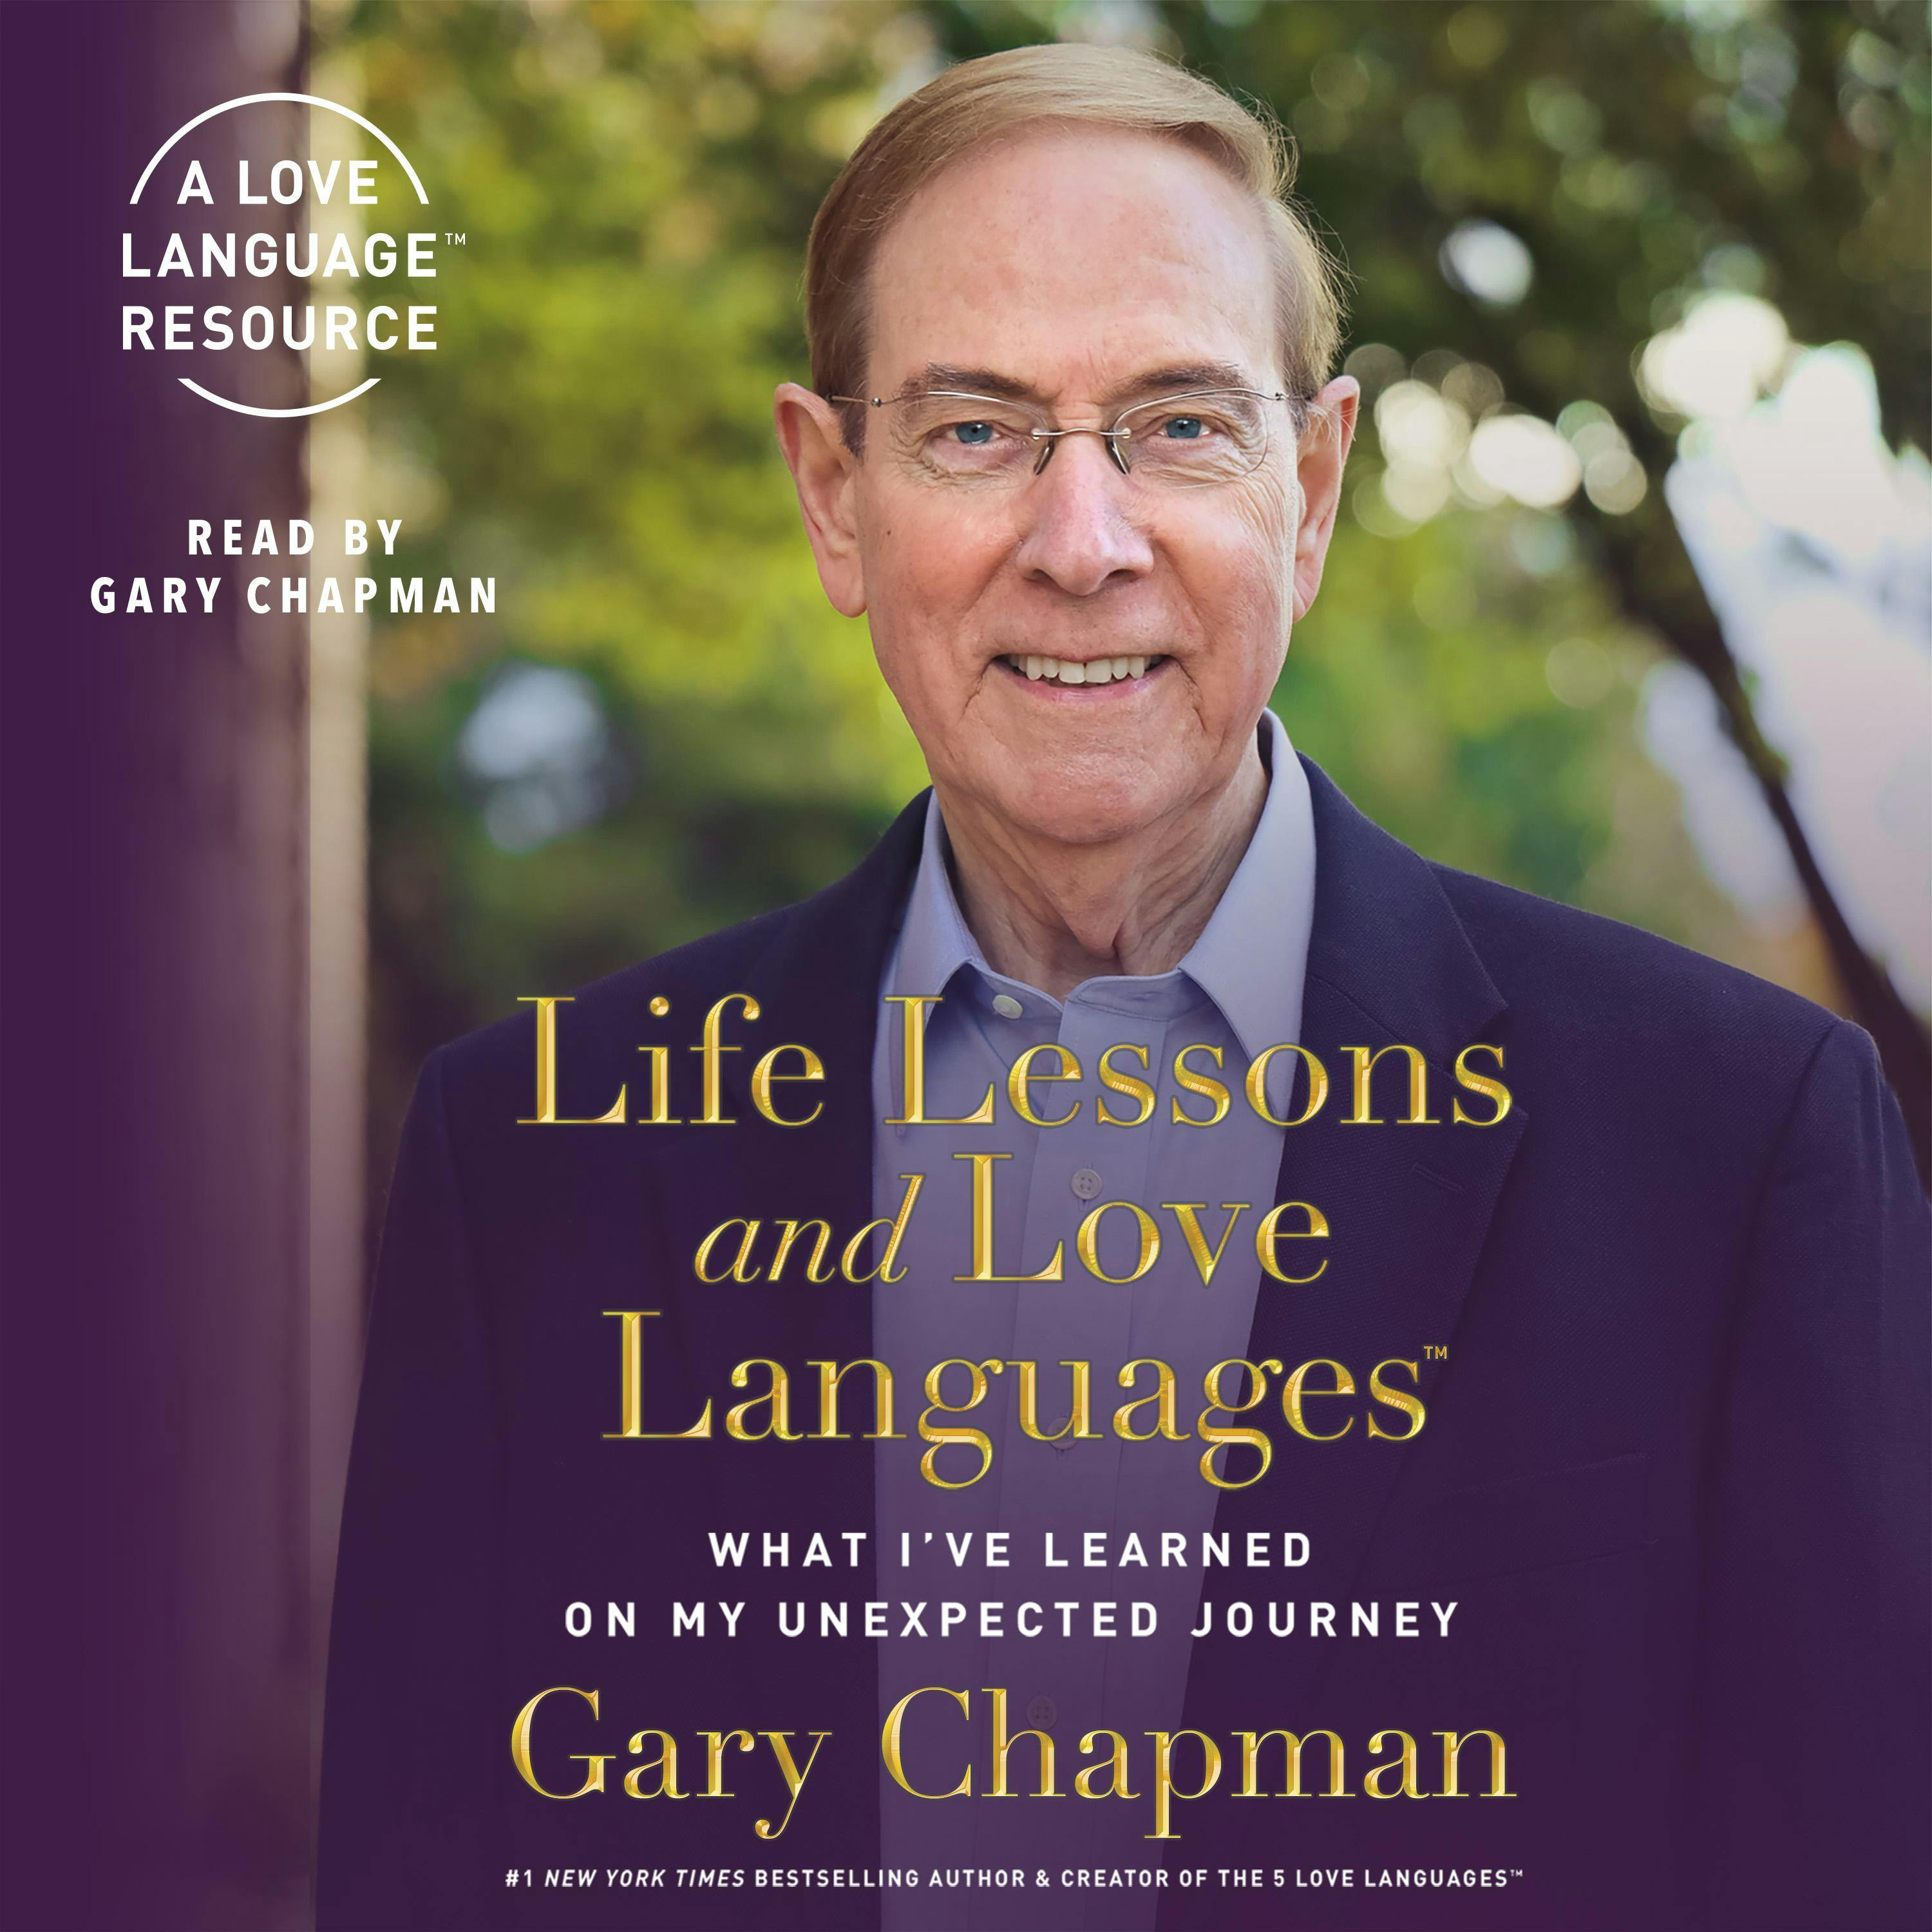 Life Lessons and Love Languages: What I've Learned on My Unexpected Journey - Gary Chapman